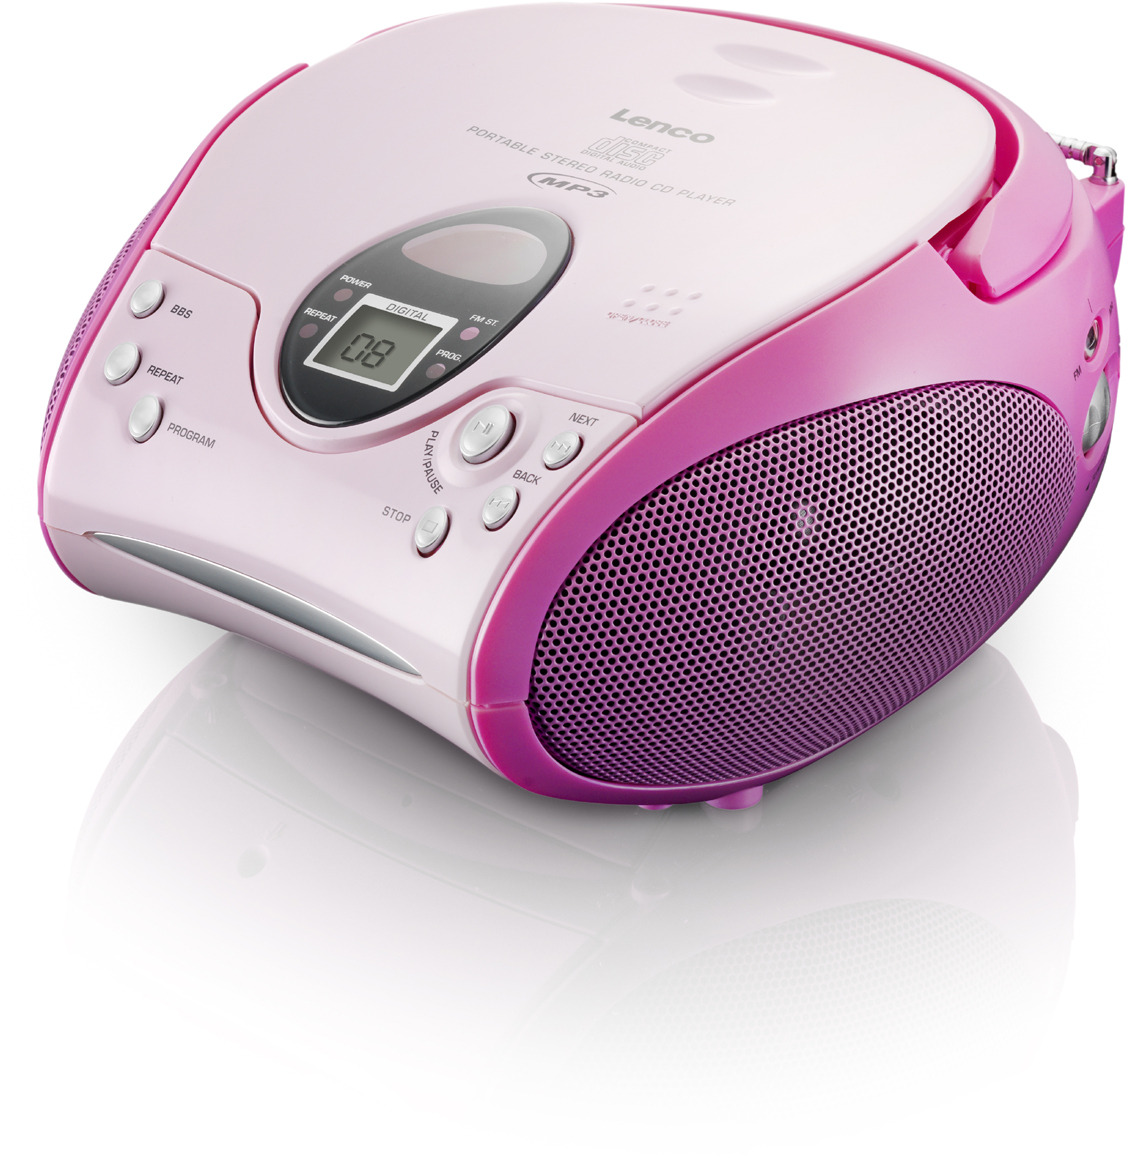 Lenco SCD-24 Stereo UKW-Radio mit CD-Player (Rosa/Pink) - best4you